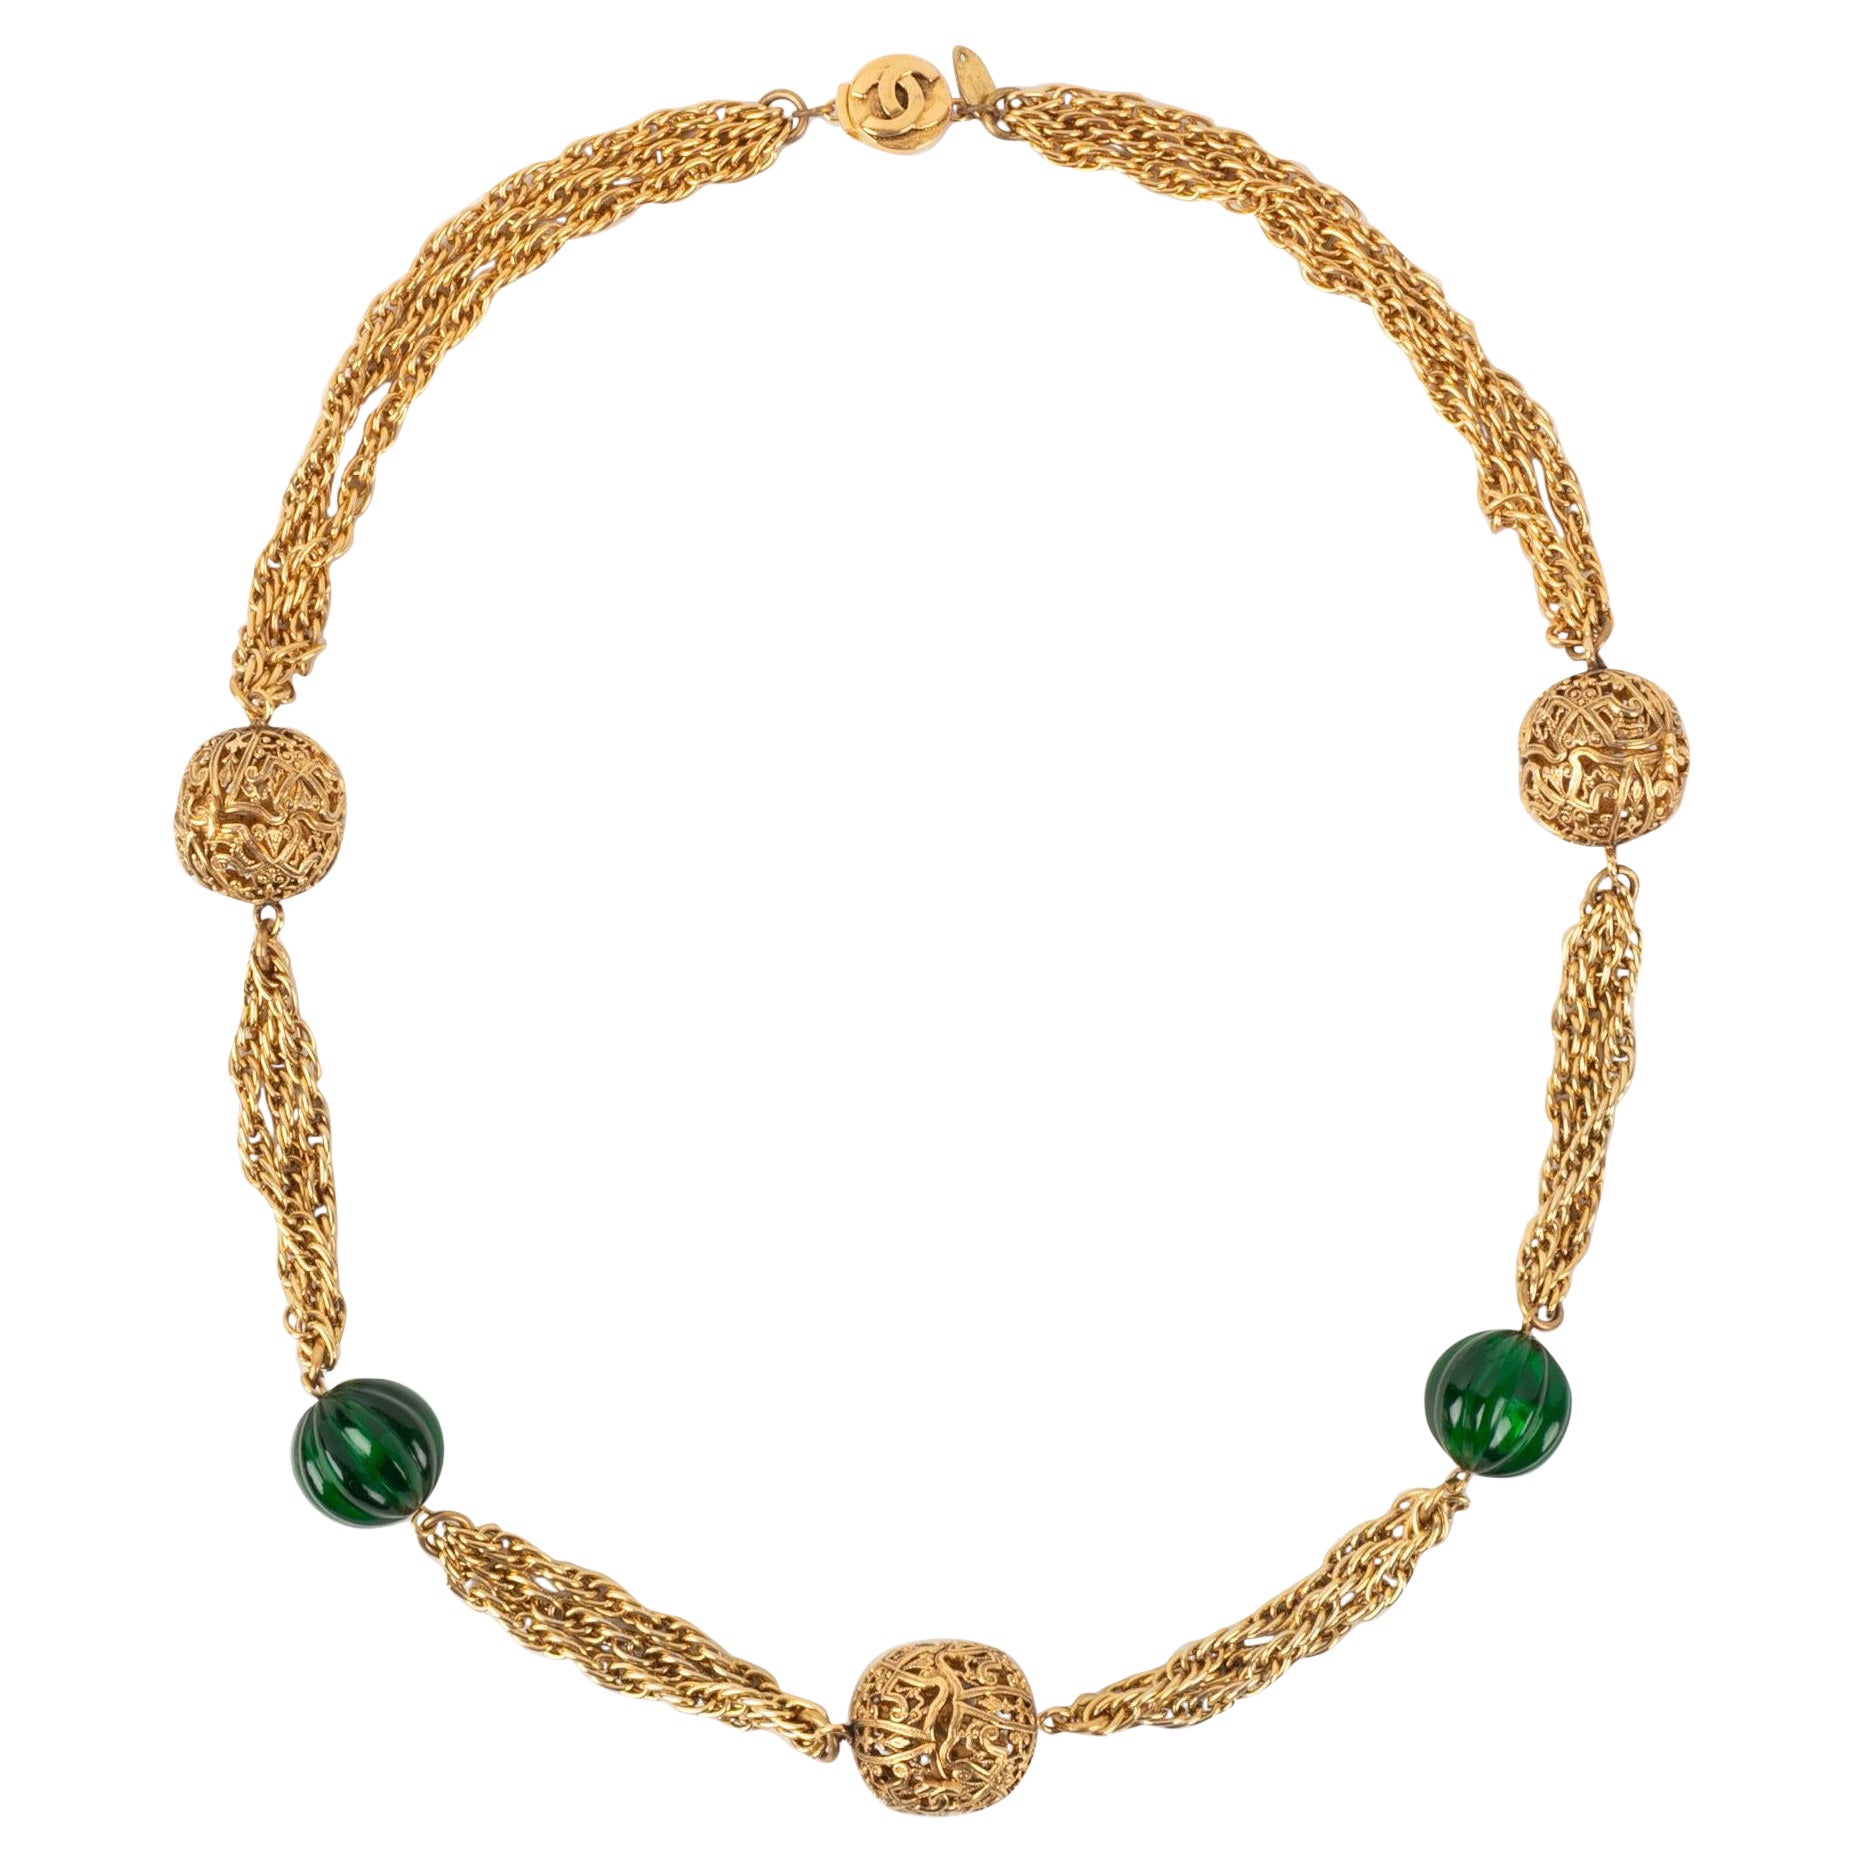 Chanel Golden Metal Necklace with Green Pearls, 1984 For Sale